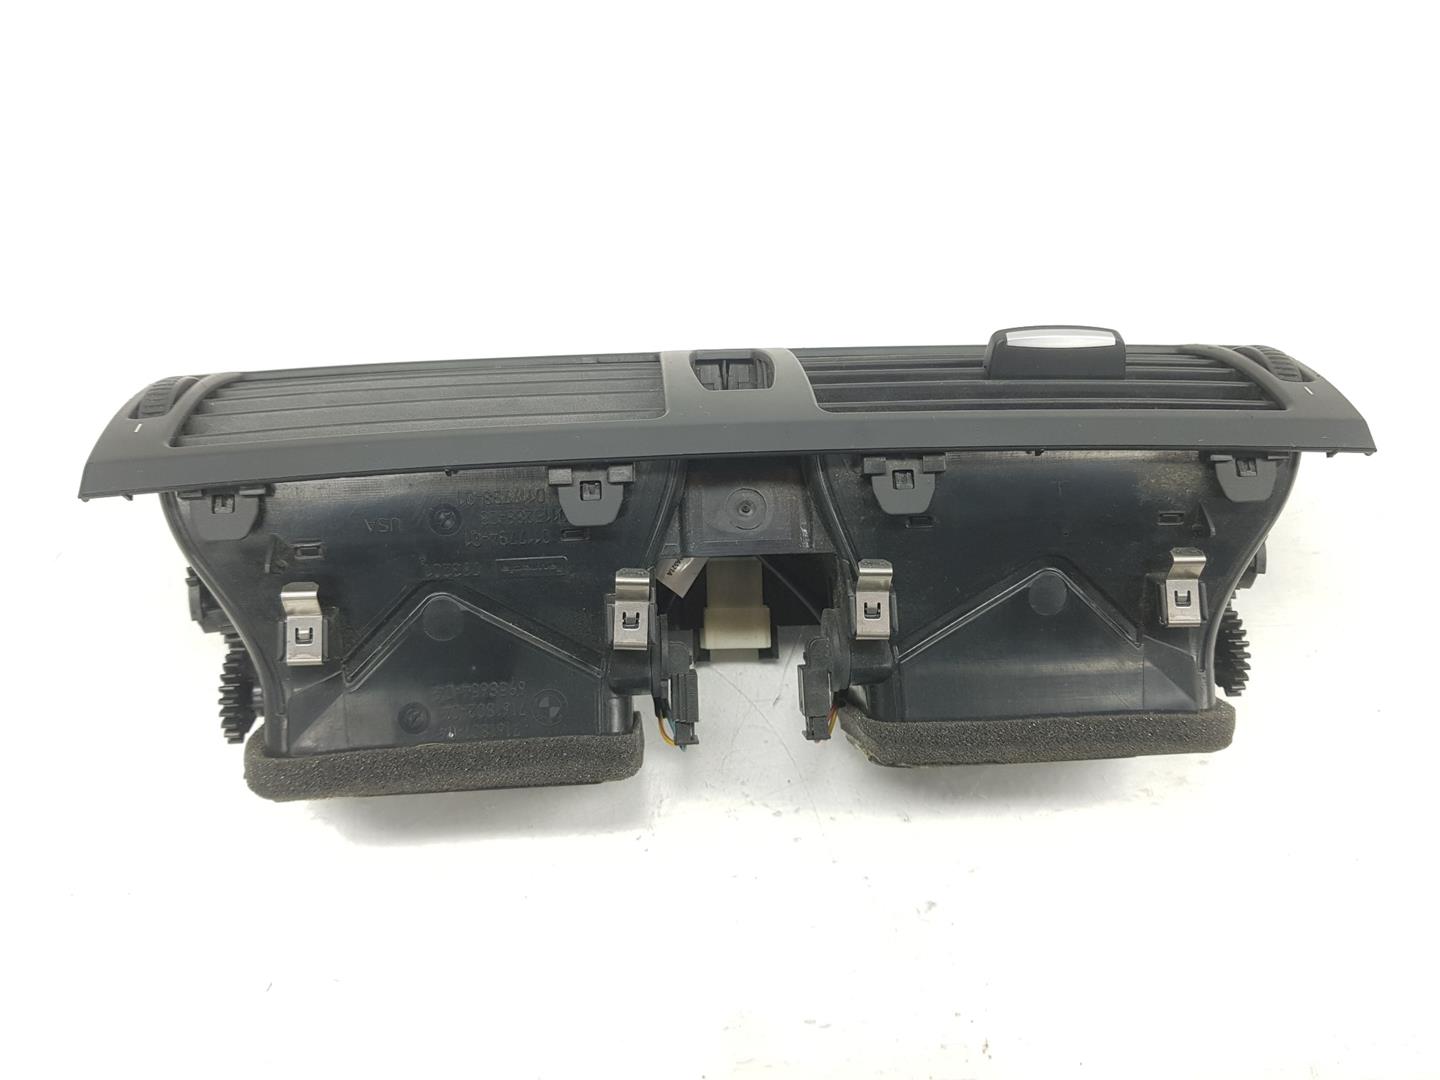 BMW X5 E70 (2006-2013) Other Interior Parts 64226958654, 6958654 23799316